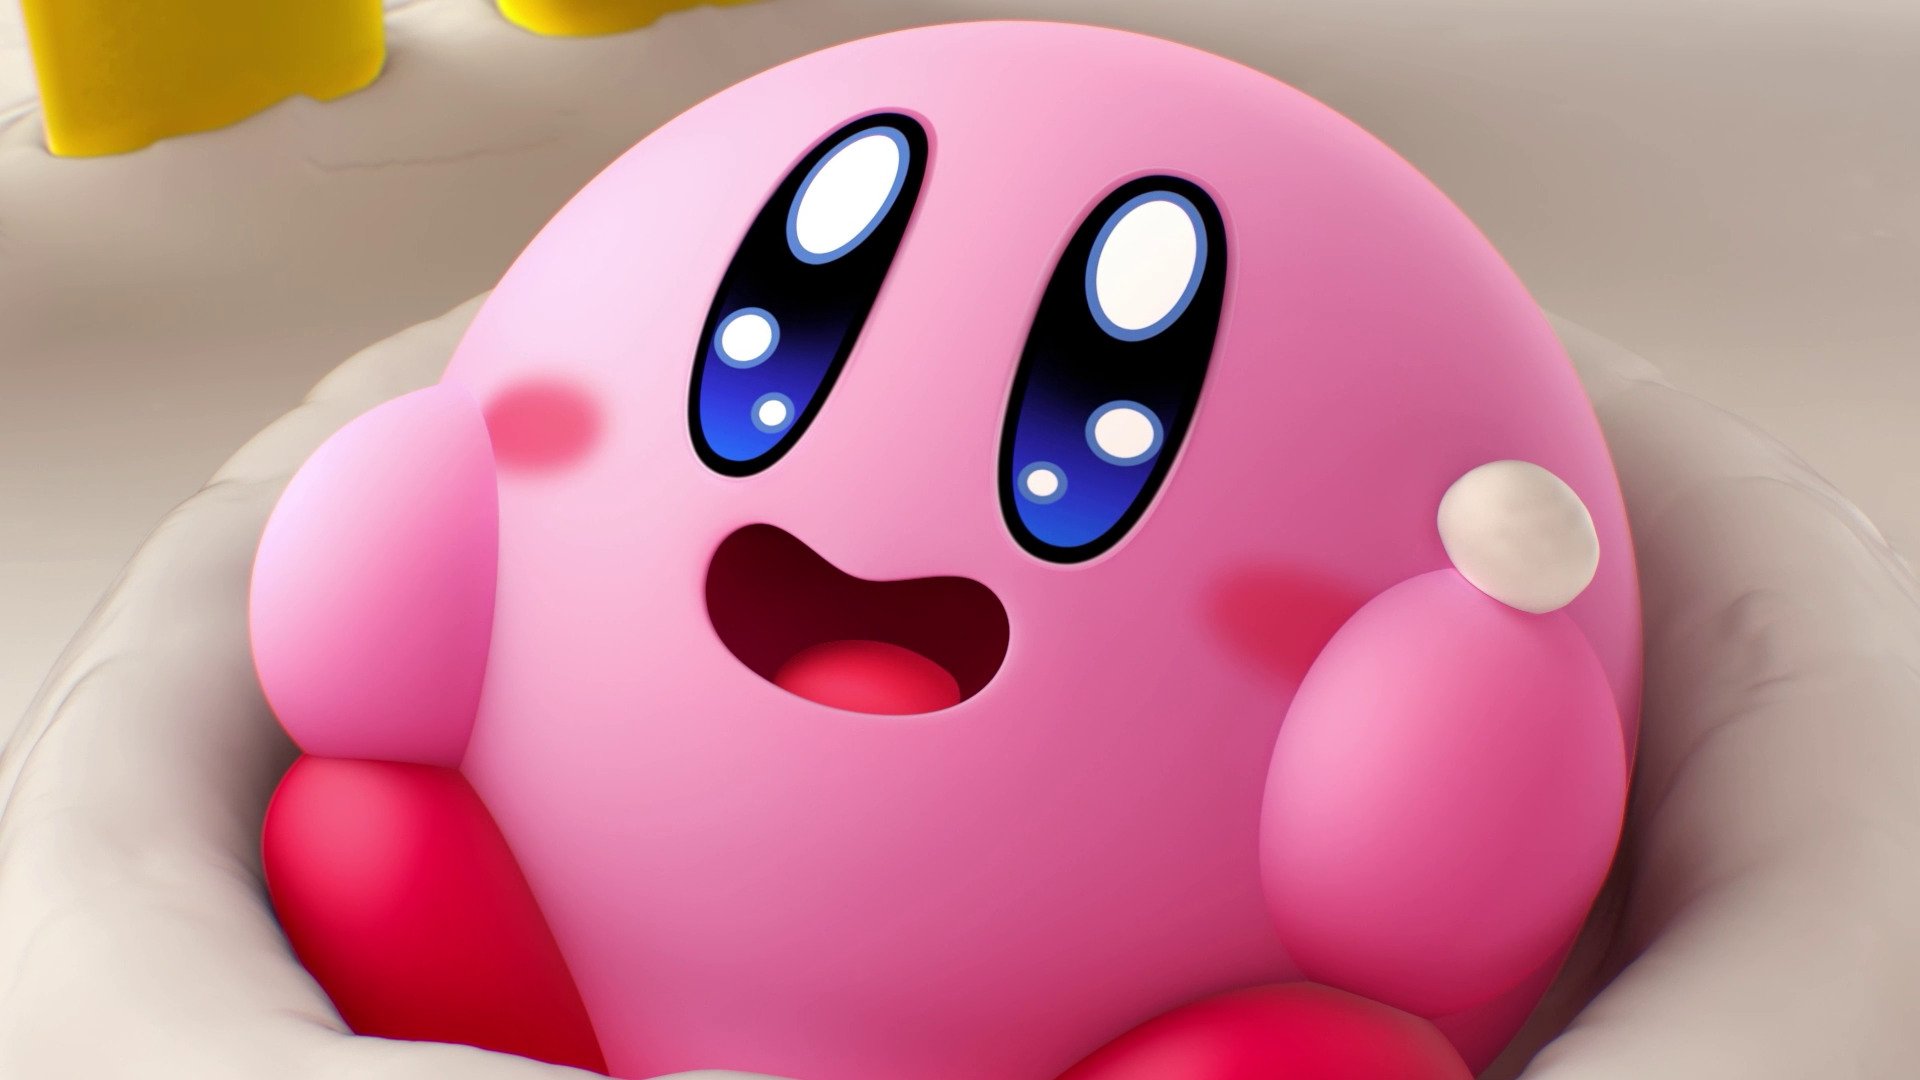 The new Kirby game will release next week, Nintendo confirms | VGC